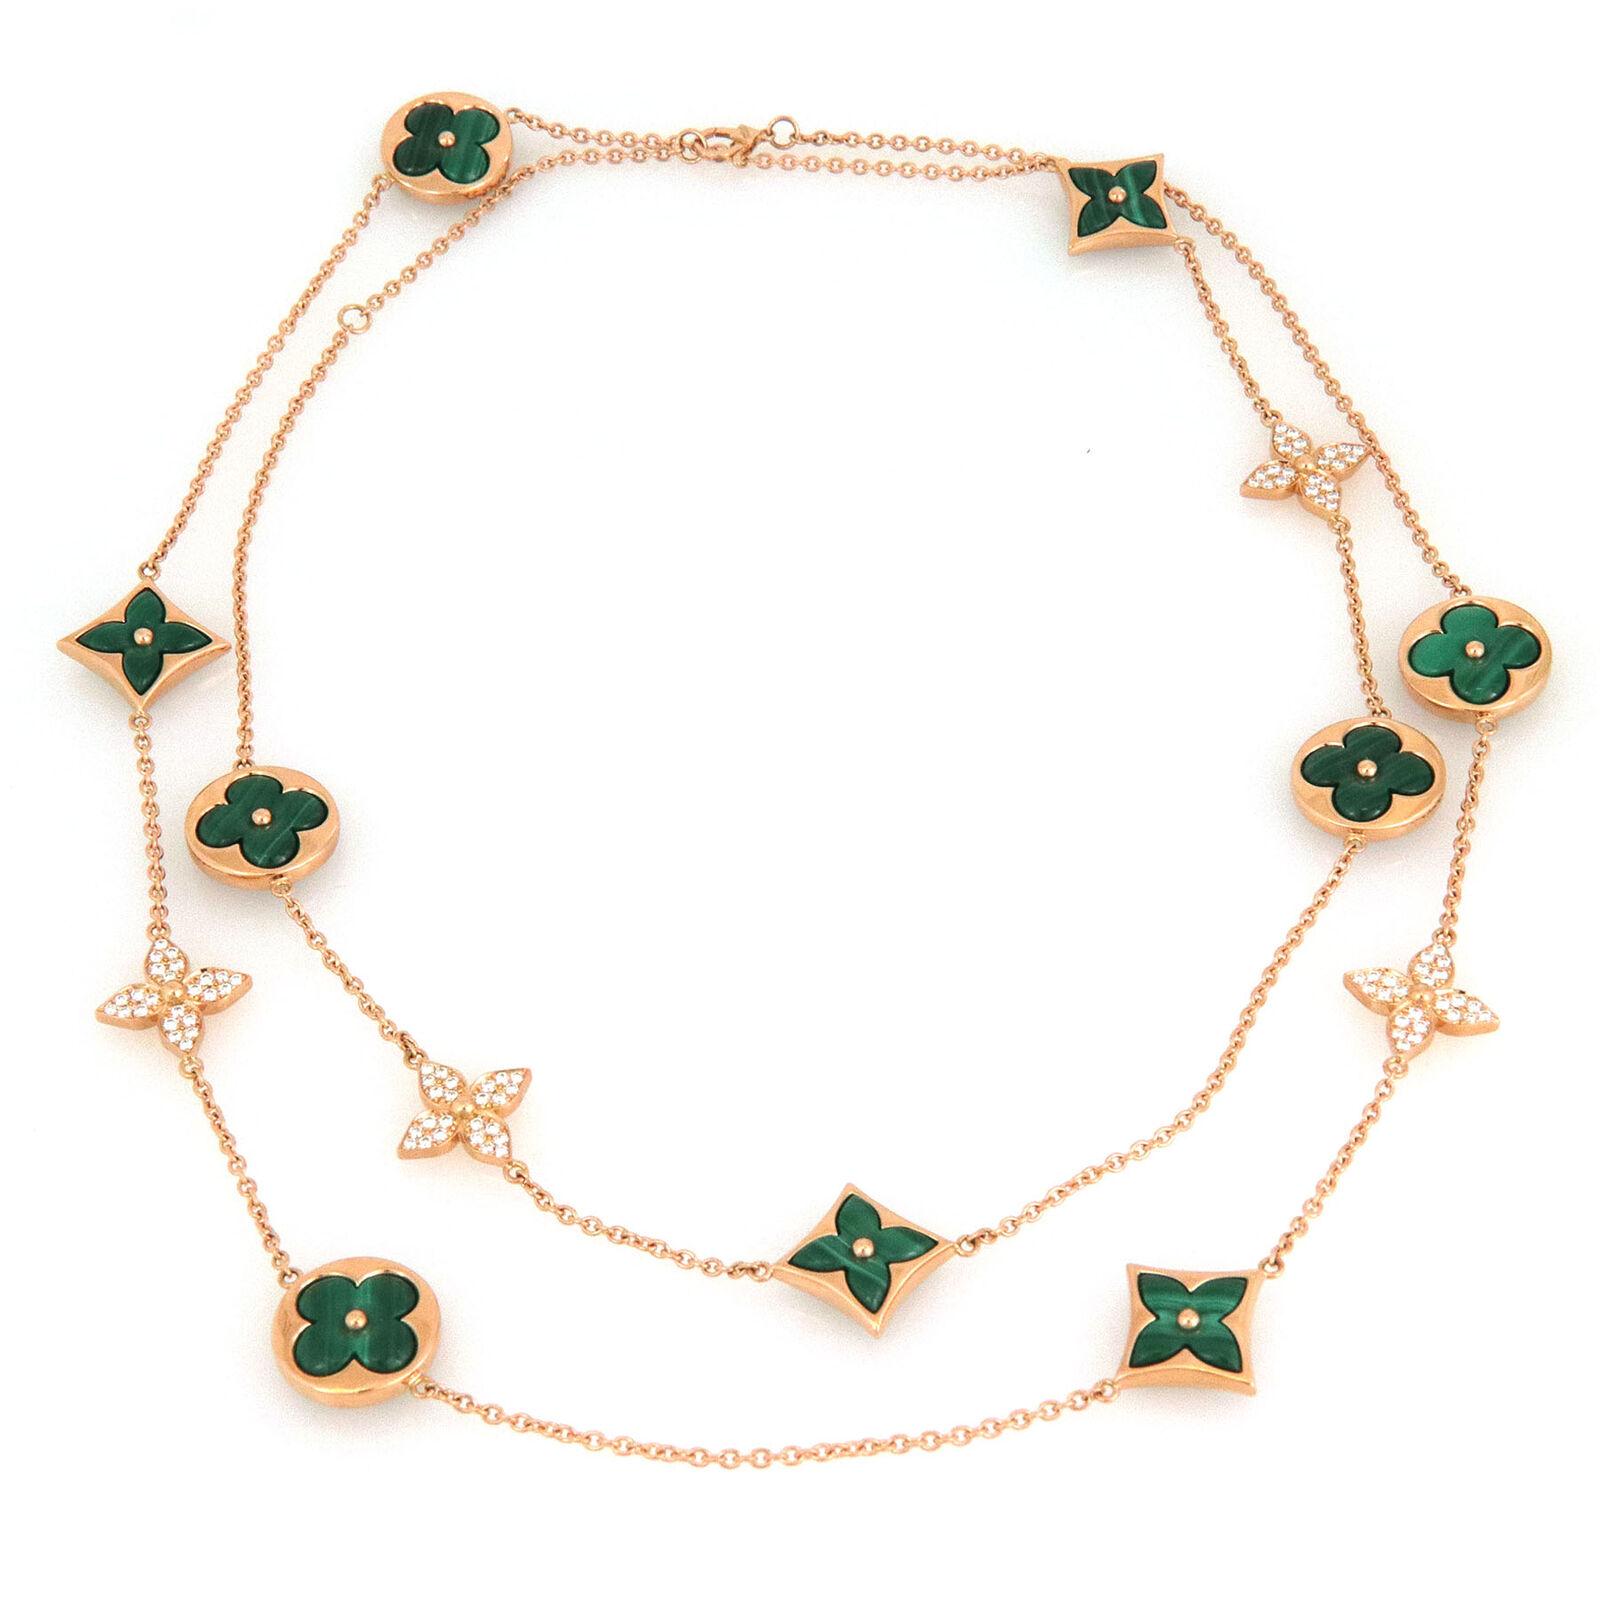 This authentic Luxurious long necklace is by Louis Vuitton Monogram from the Blossom Collection.  It features a 35.5